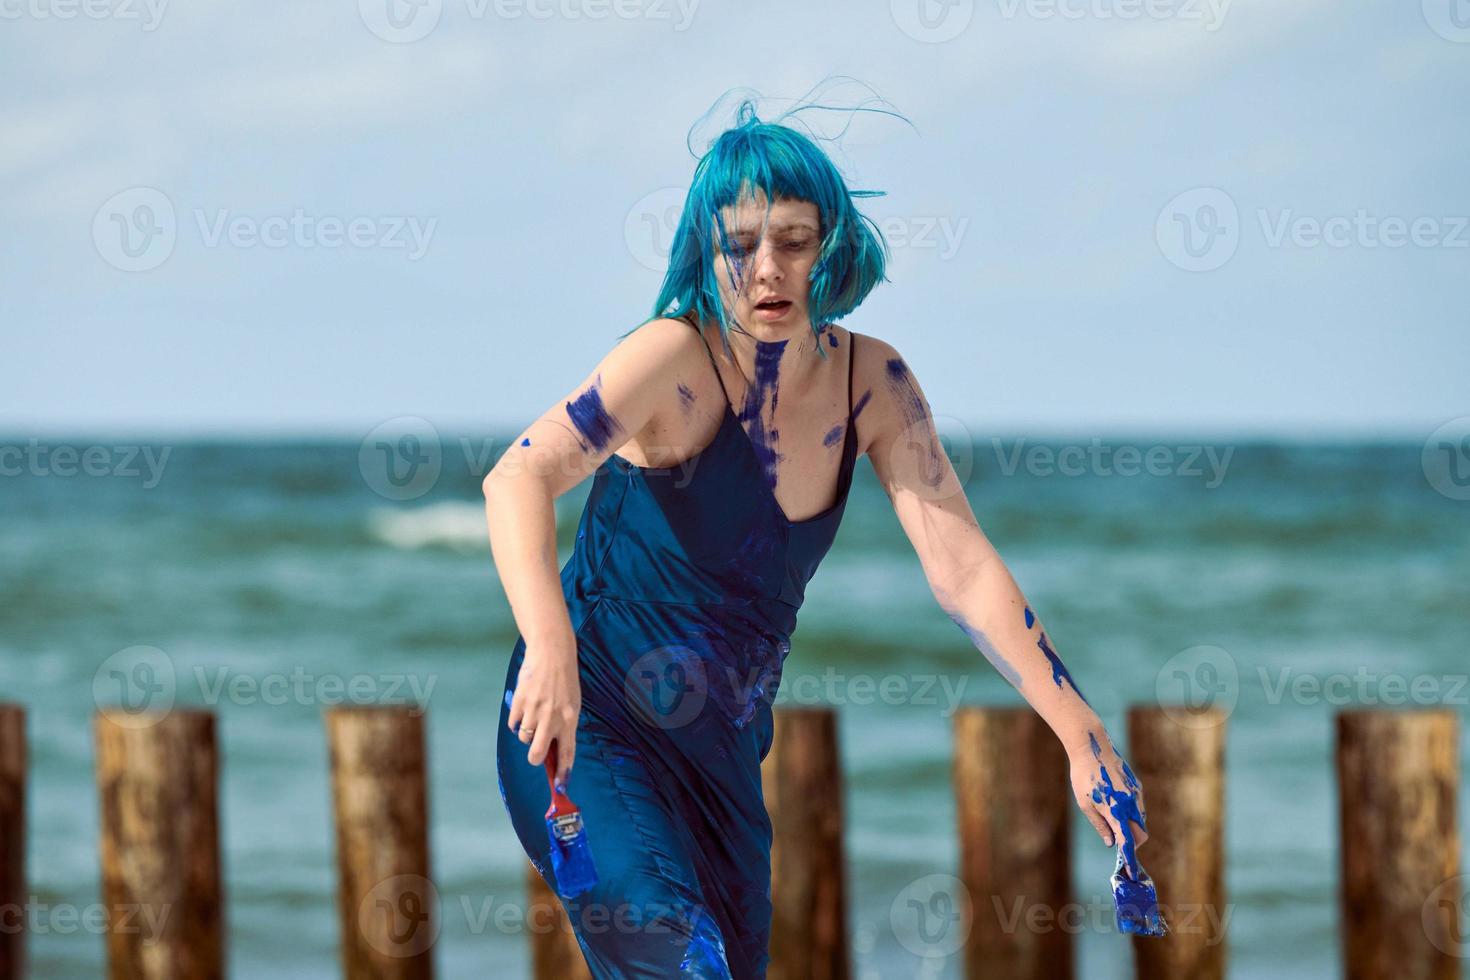 Artistic blue-haired woman performance artist smeared with blue gouache paints dancing on beach photo